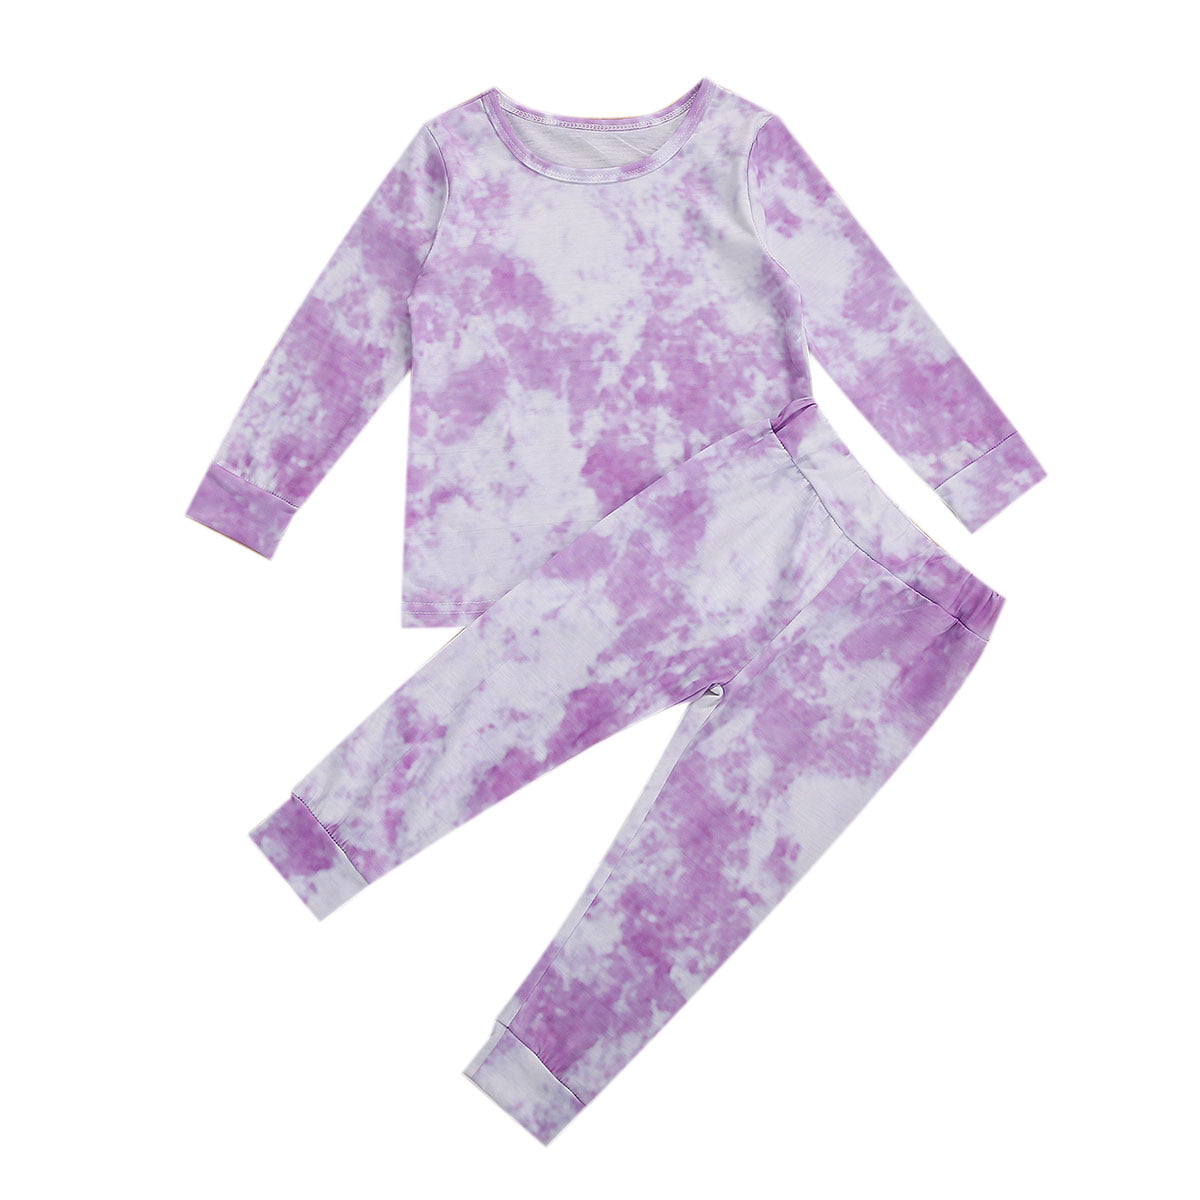 Kids Toddler Baby Girl Boy Tie Dye Outfit Clothes Two Piece Pajamas Lounge Set Sleepwear Homewear Casual Clothing 